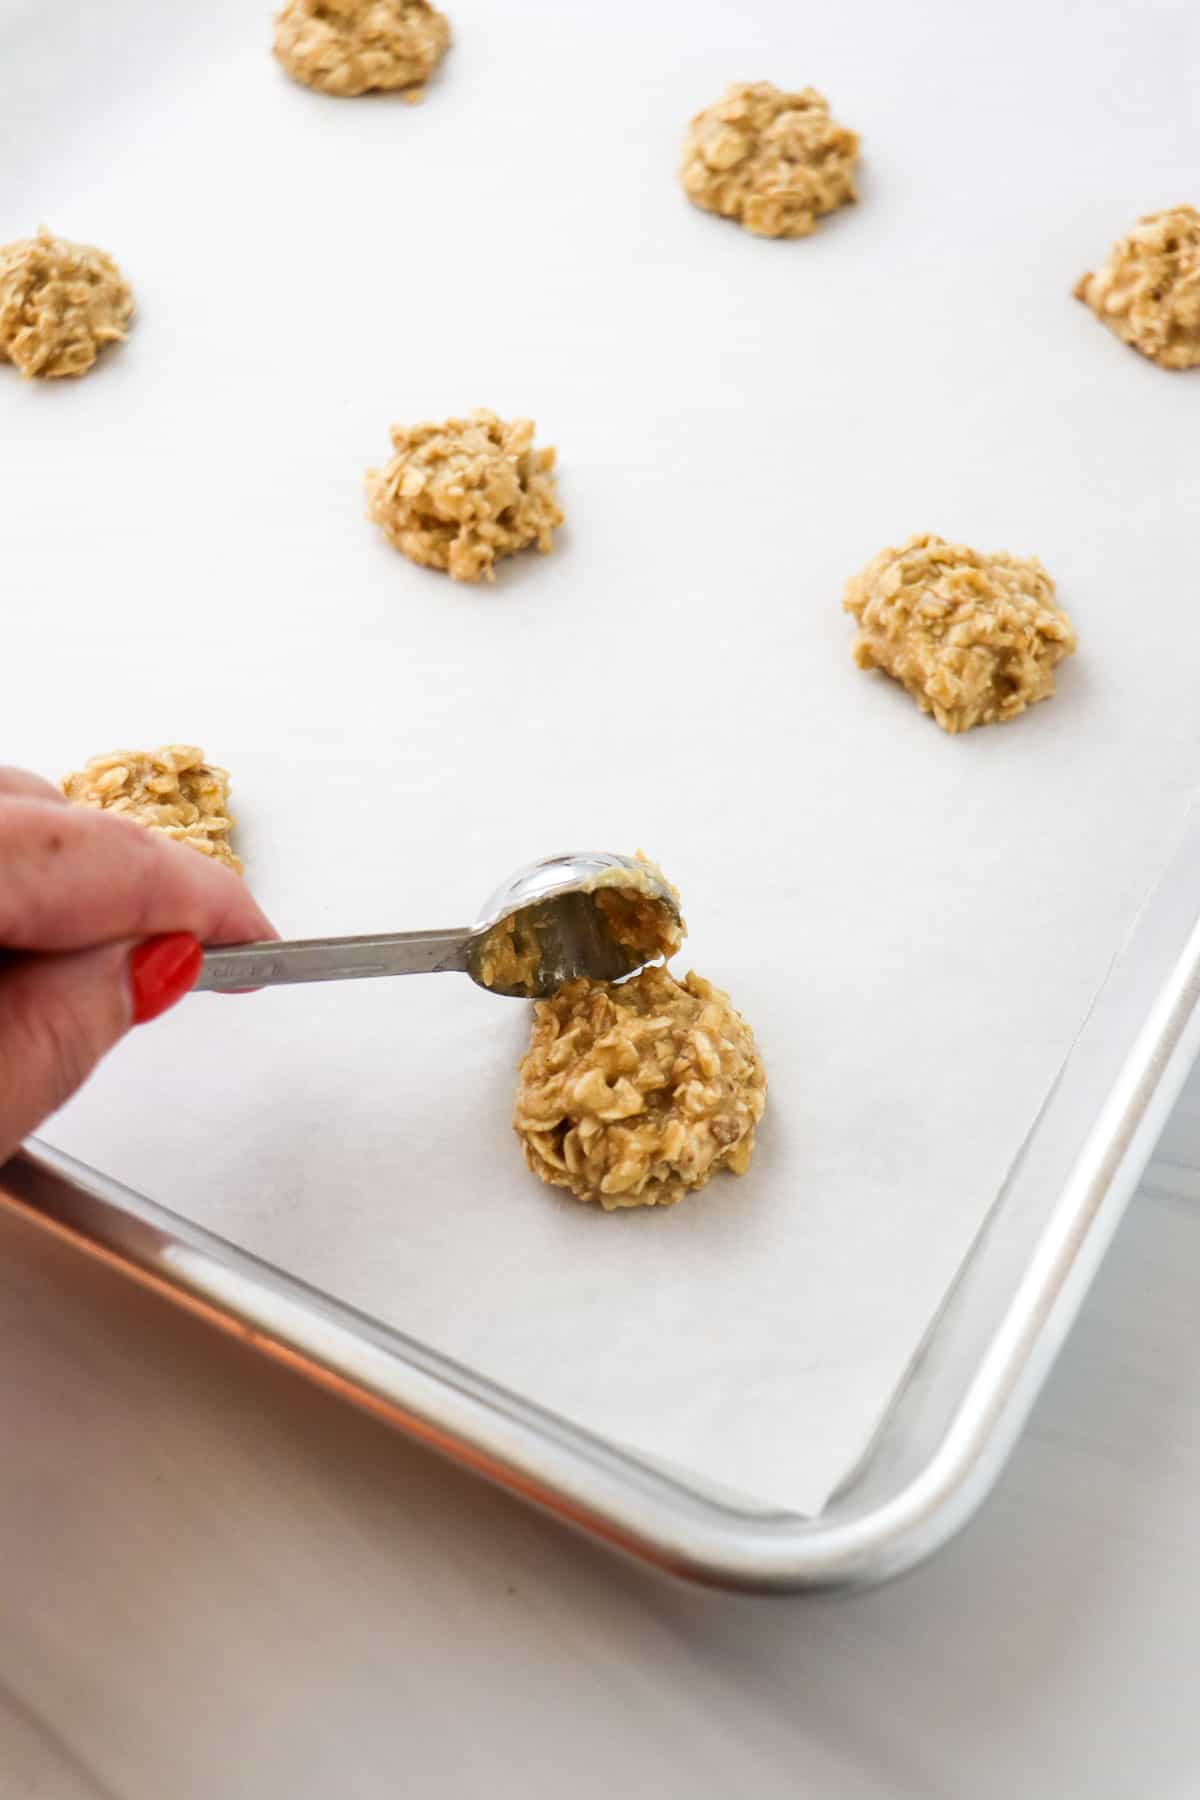 Person dropping spoonfuls of oatmeal cookie dough on a parchment lined baking sheet.